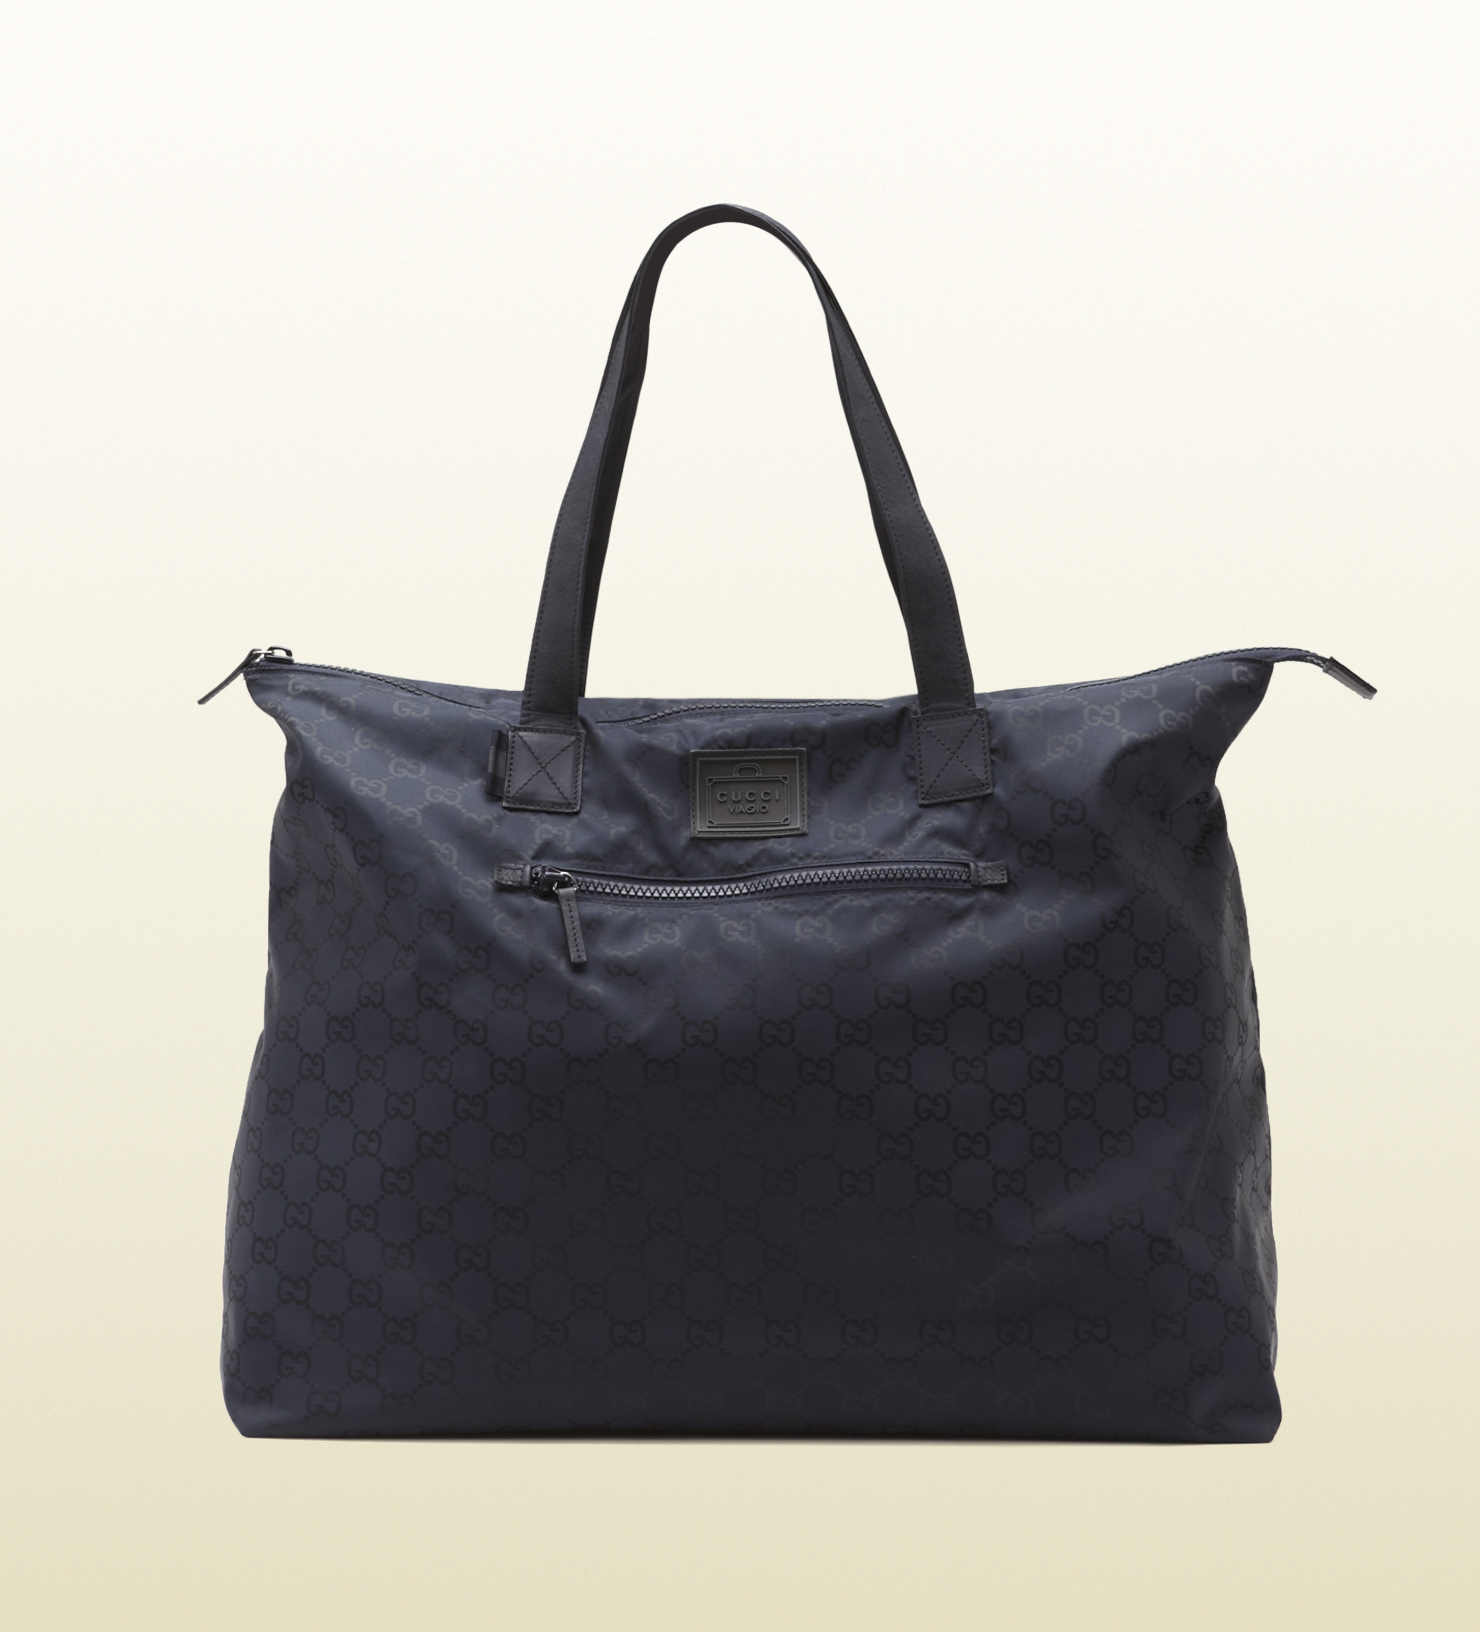 Lyst - Gucci Blue Gg Nylon Duffel Bag From Viaggio Collection in Blue ...